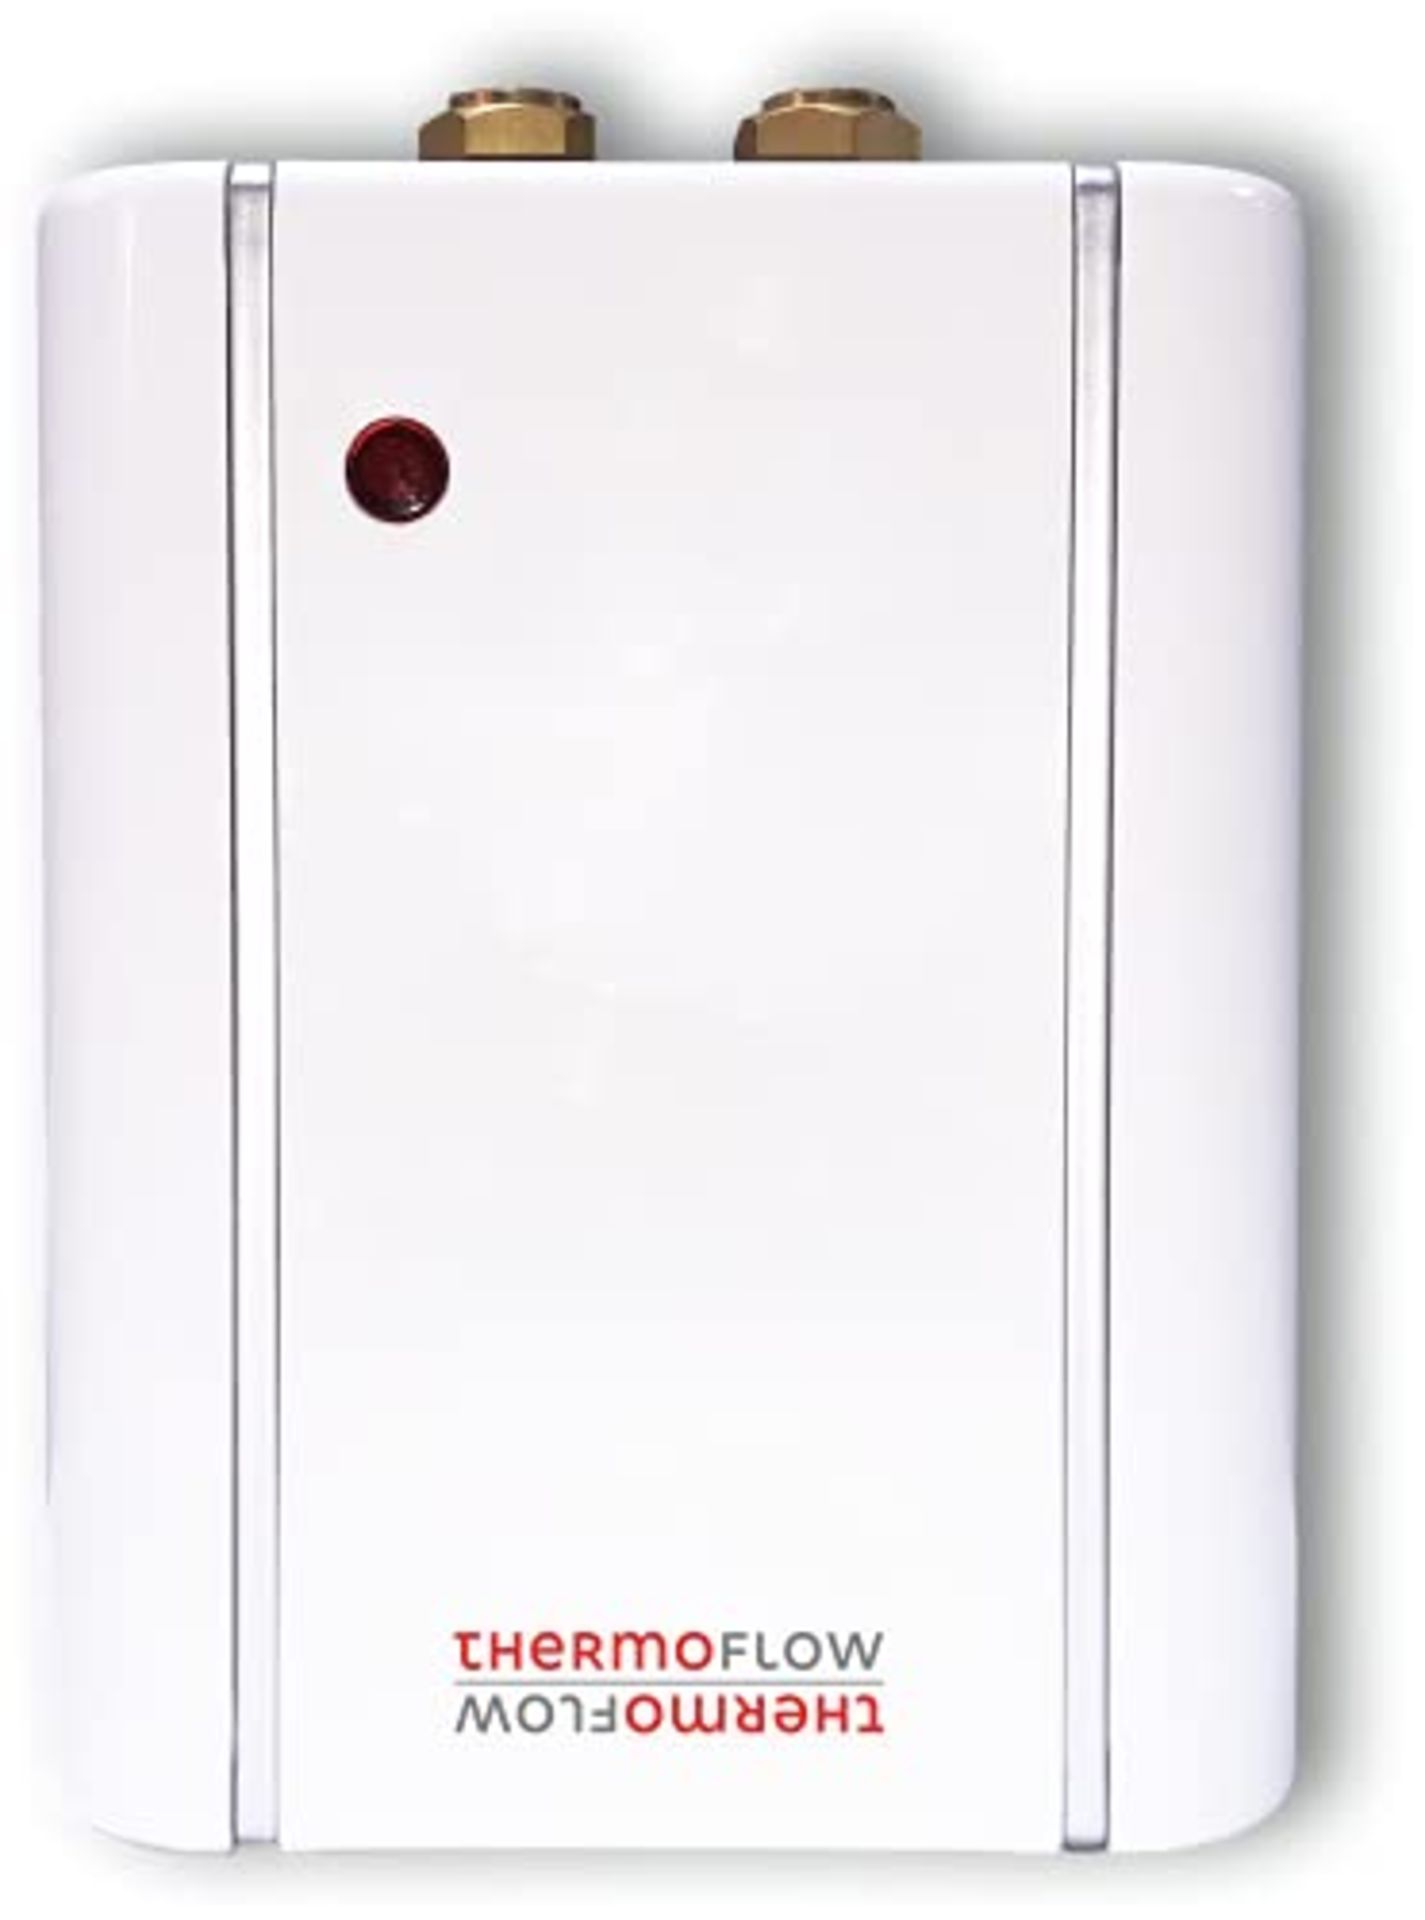 RRP £69.00 Thermoflow Elex 5.5 kW Instant Water Heater 230 V | unpressurized small instant water